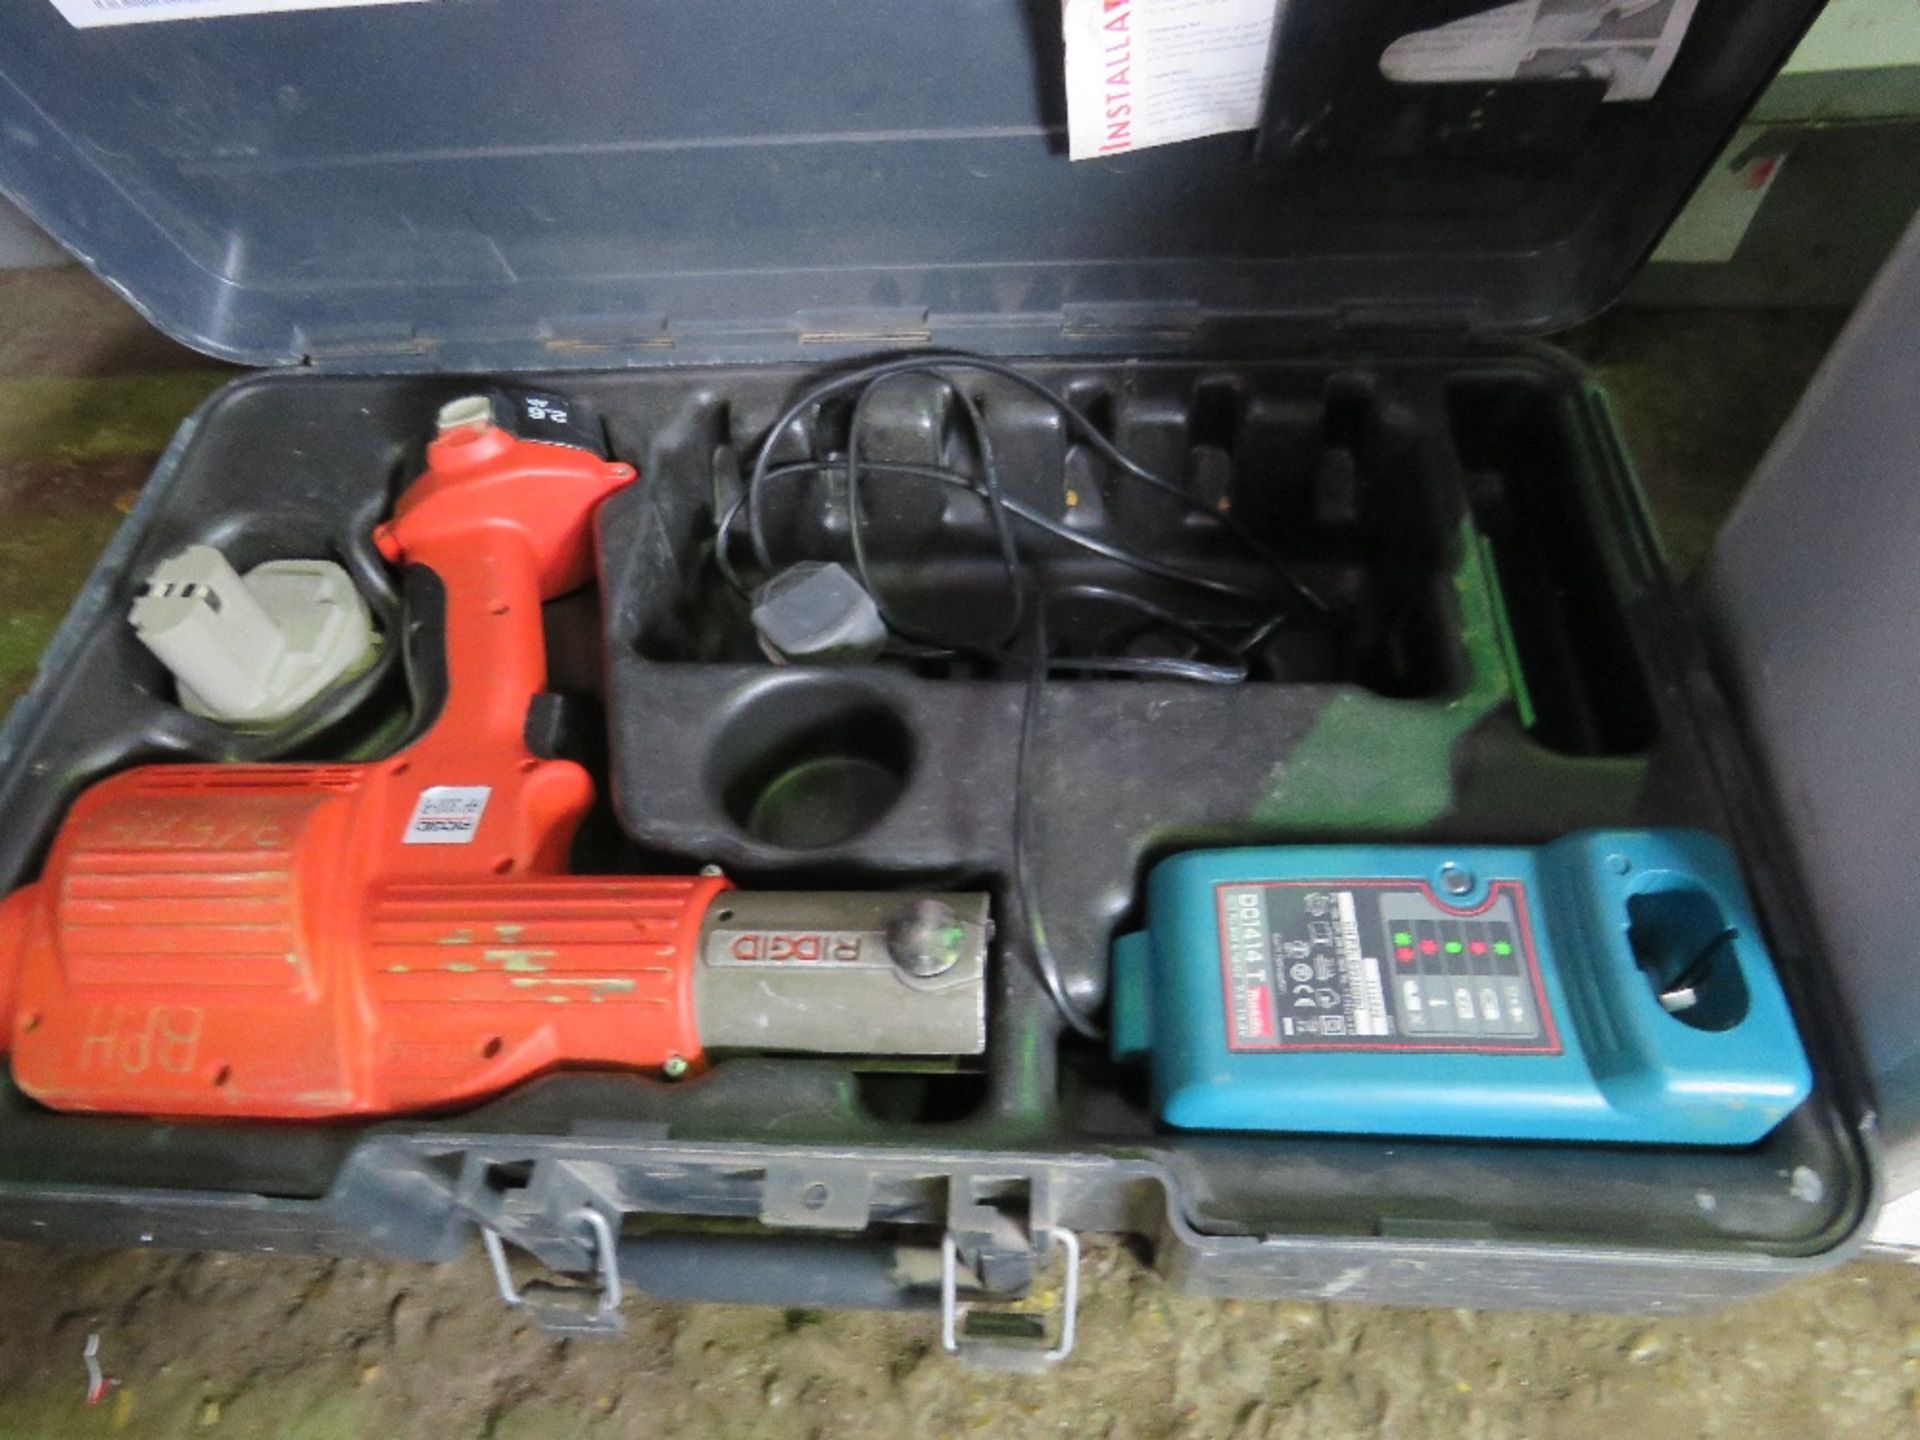 RIDGID RP300-B BATTERY POWERED CRIMPING GUN. NO HEADS. UNTESTED, CONDITION UNKNOWN.